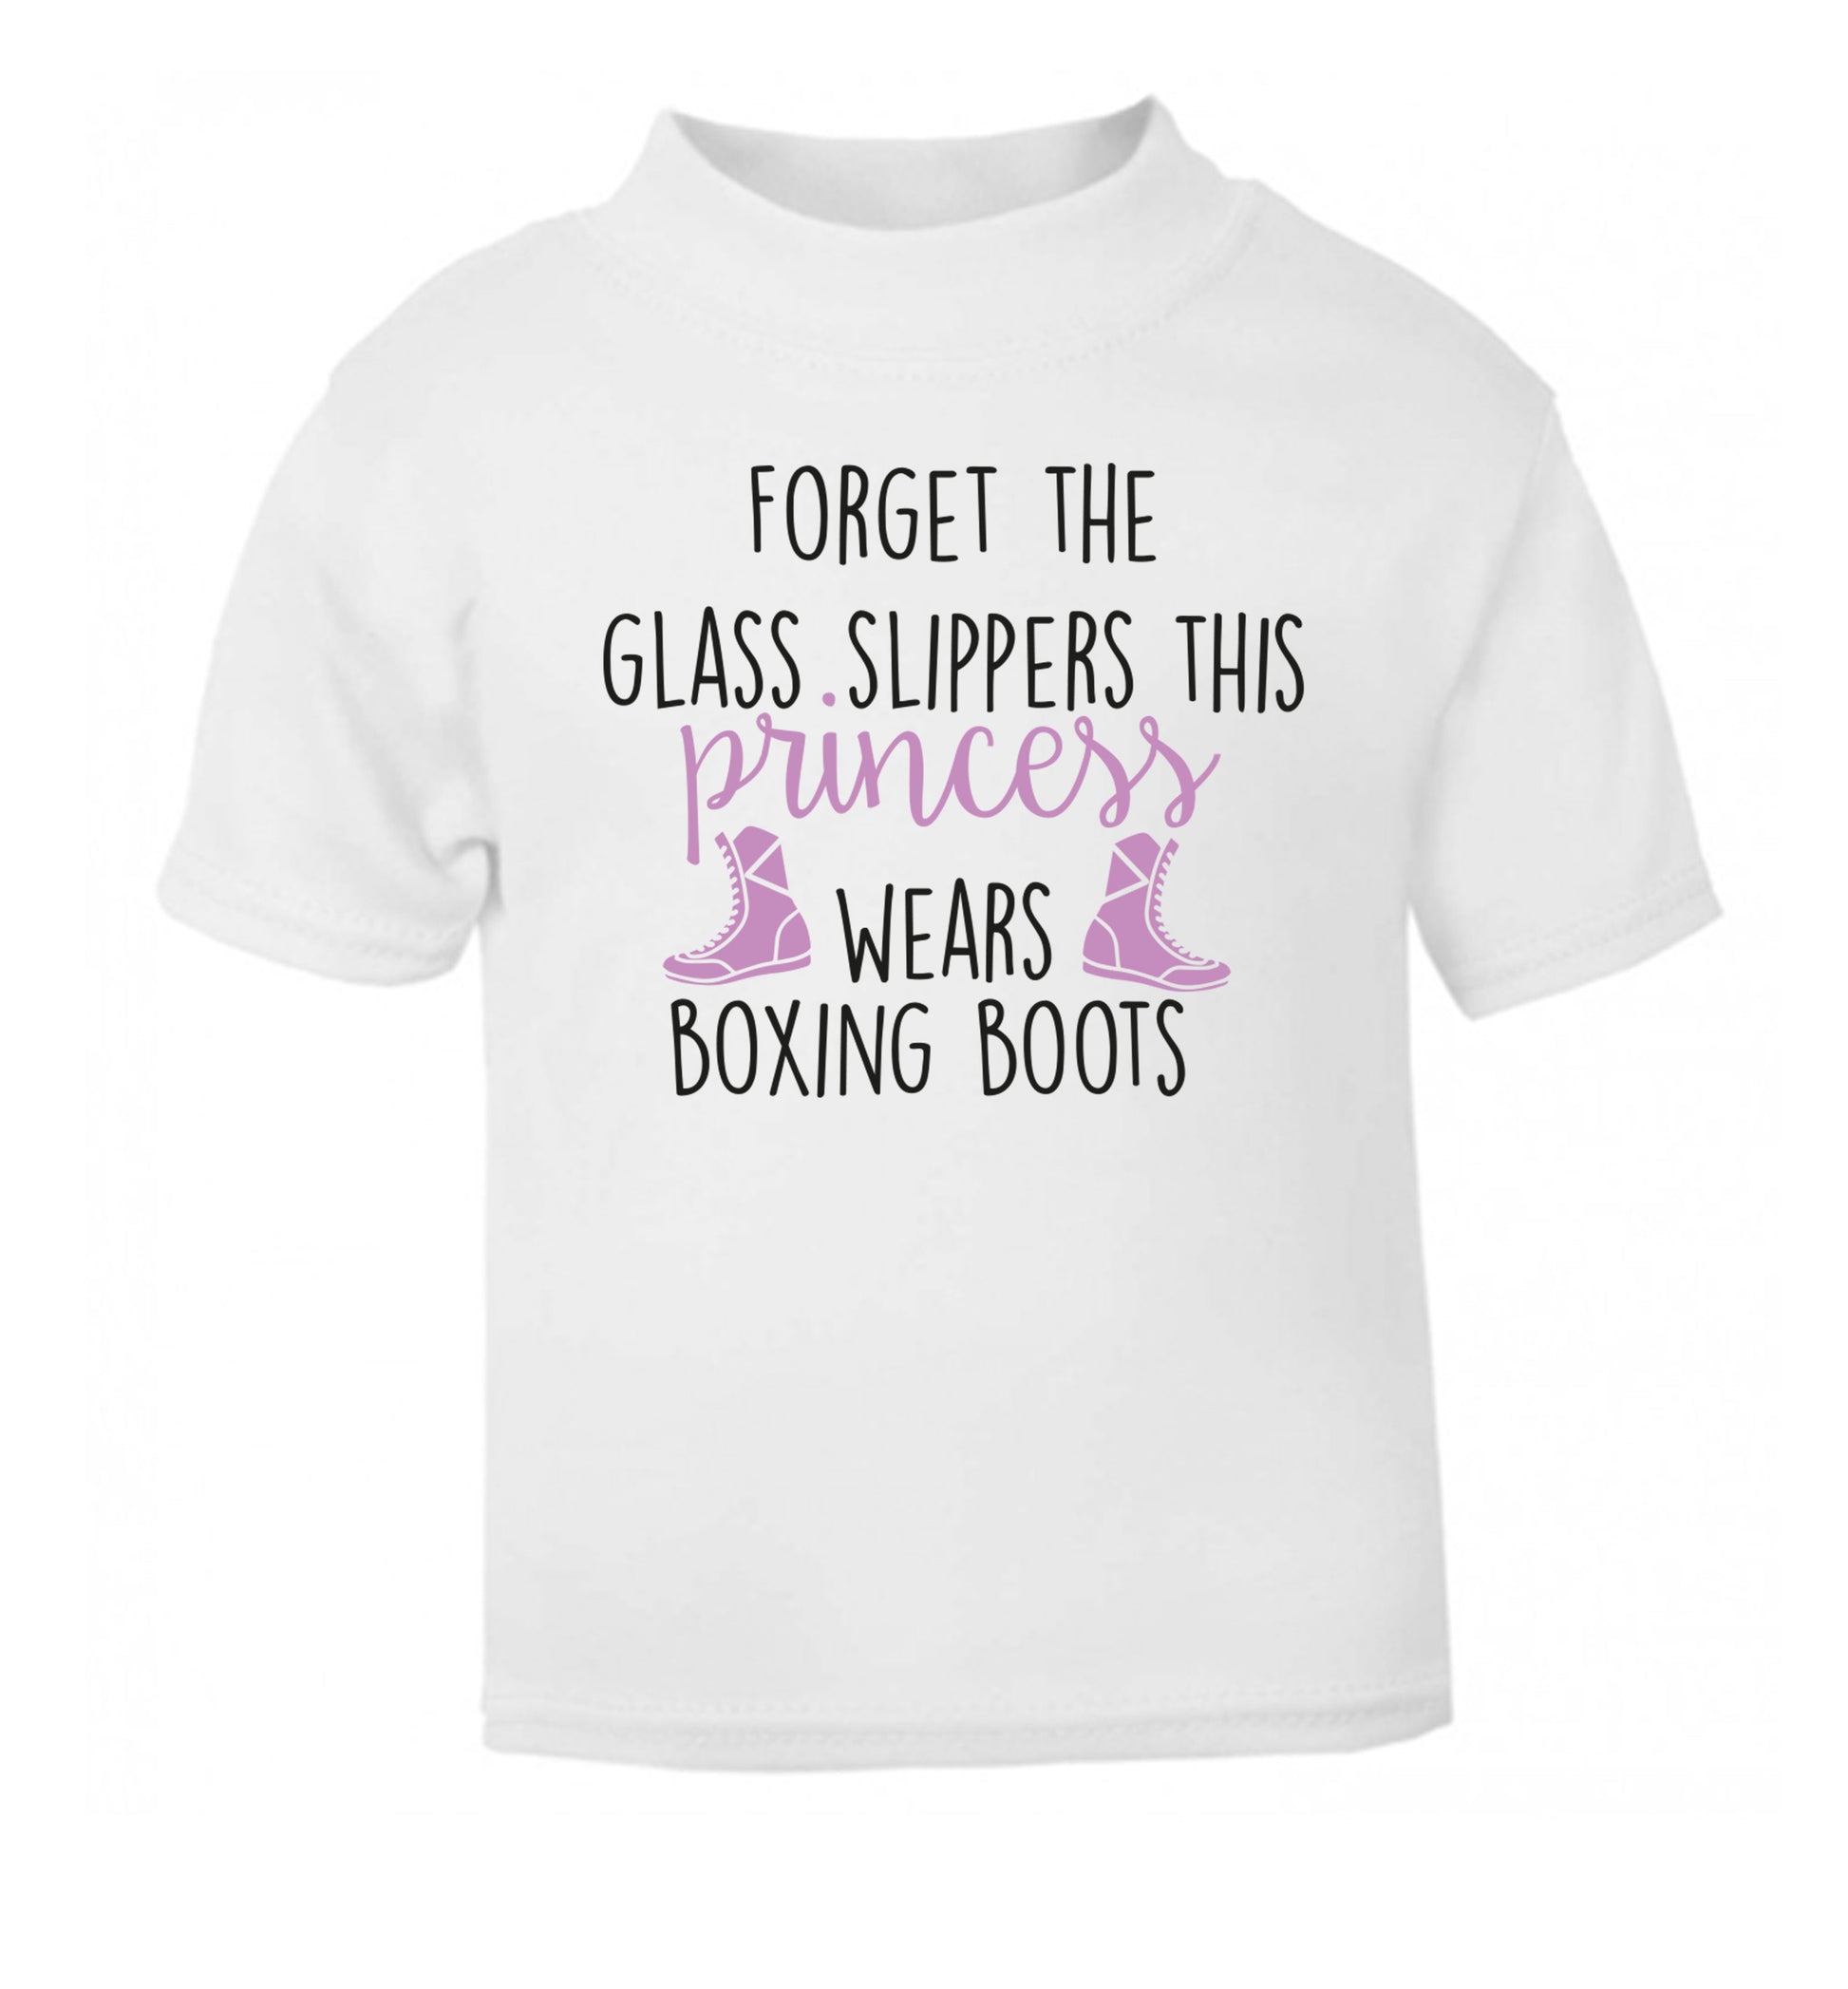 Forget the glass slippers this princess wears boxing boots white Baby Toddler Tshirt 2 Years